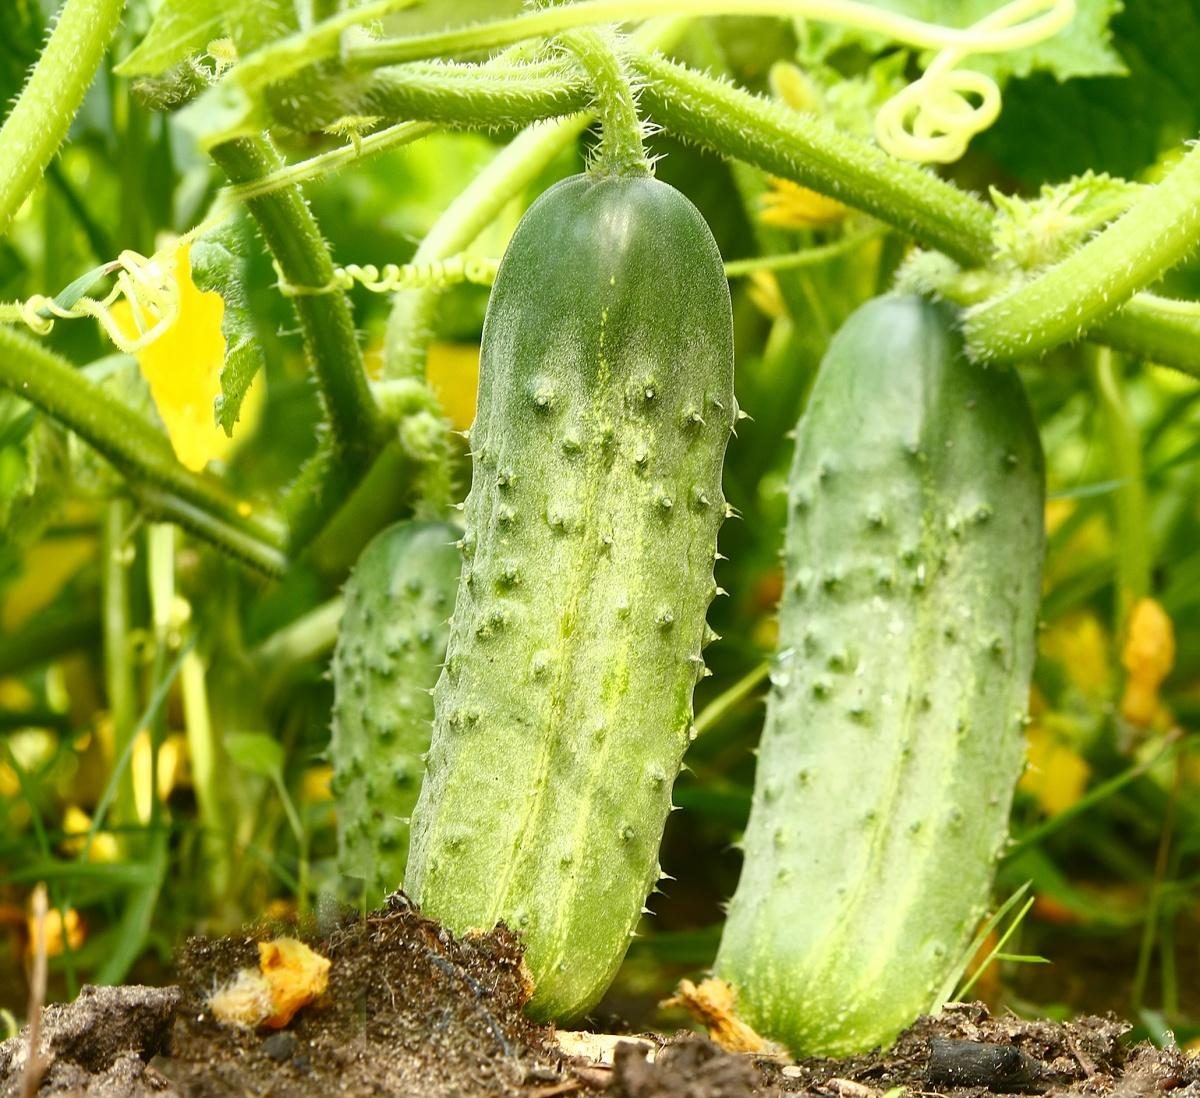 Altai early cucumber